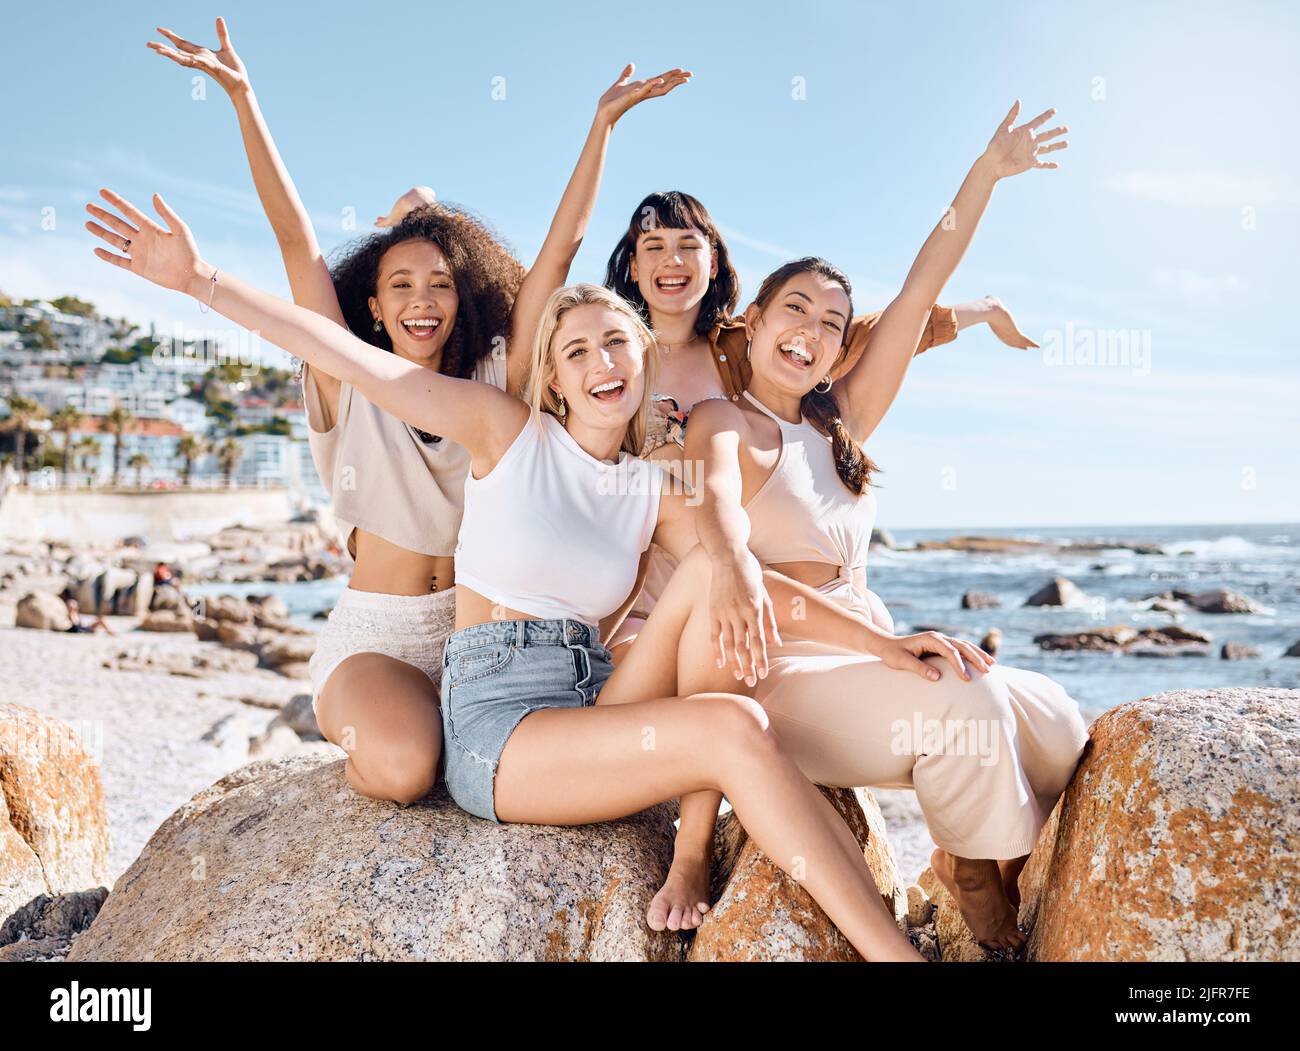 Life is beautiful but friendship makes it makes it extra special. Shot of a group of female friends spending time together at the beach. Stock Photo